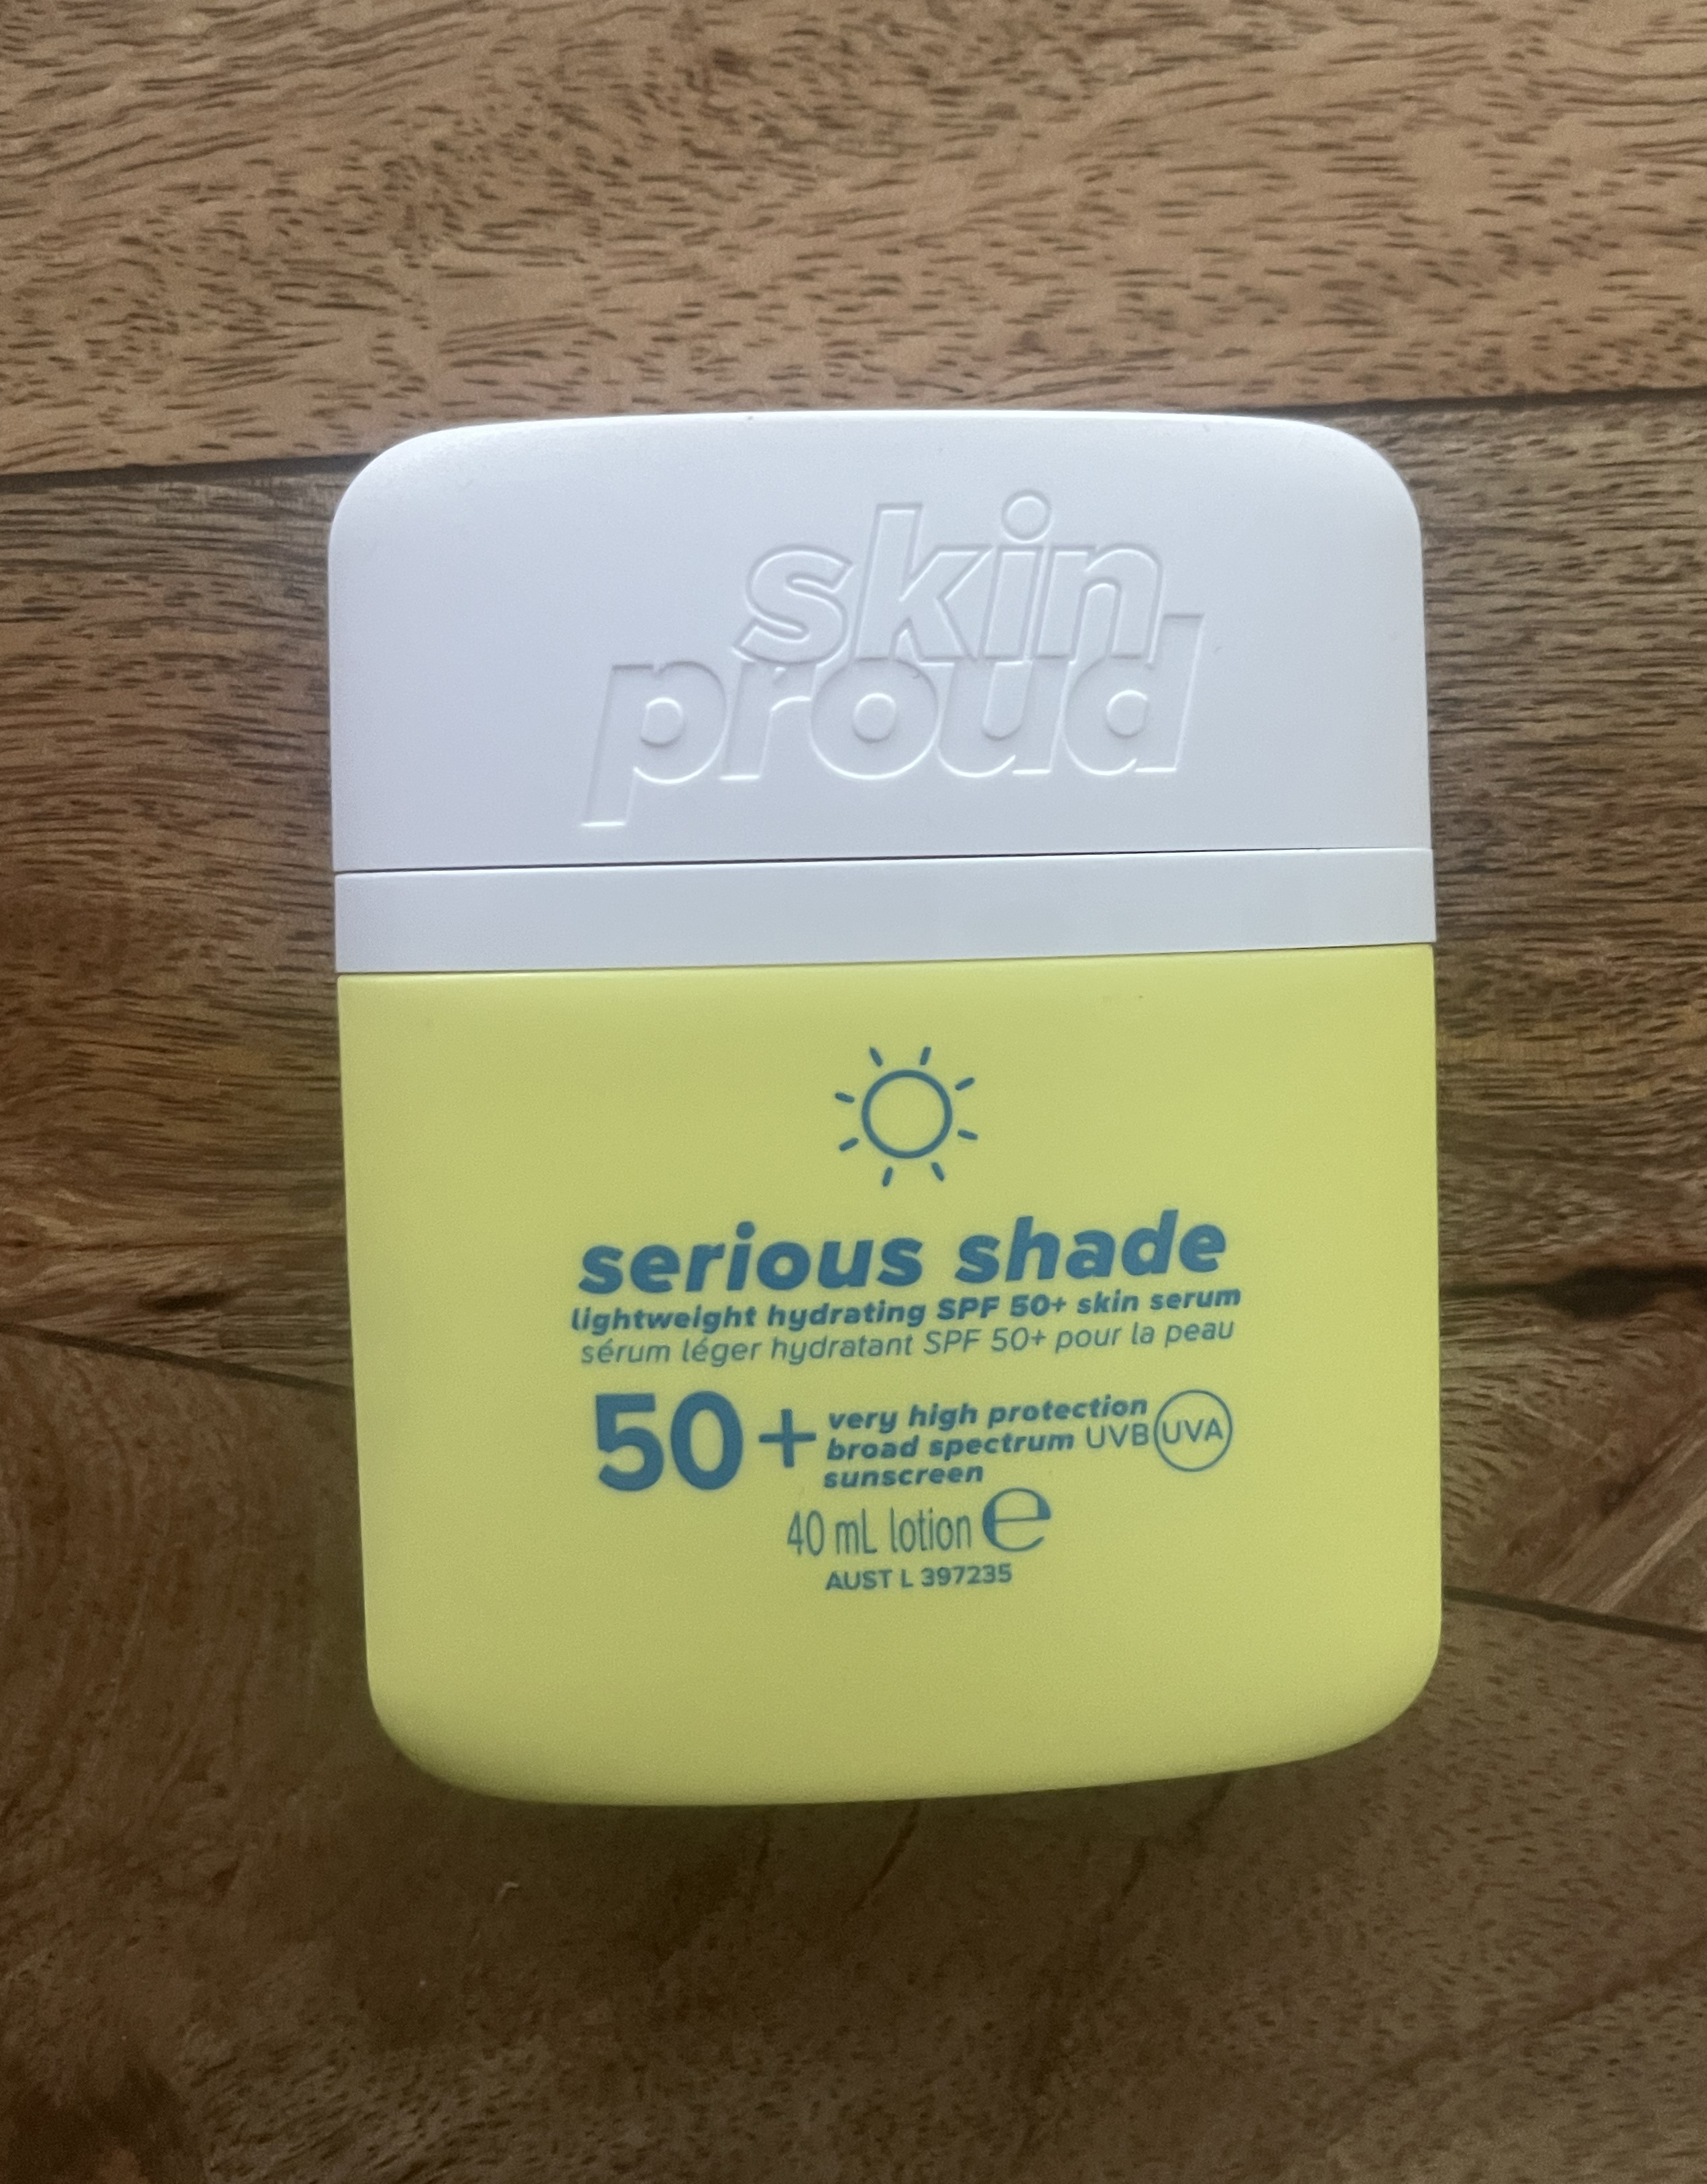 This pocket-sized sunscreen provides super-high protection.